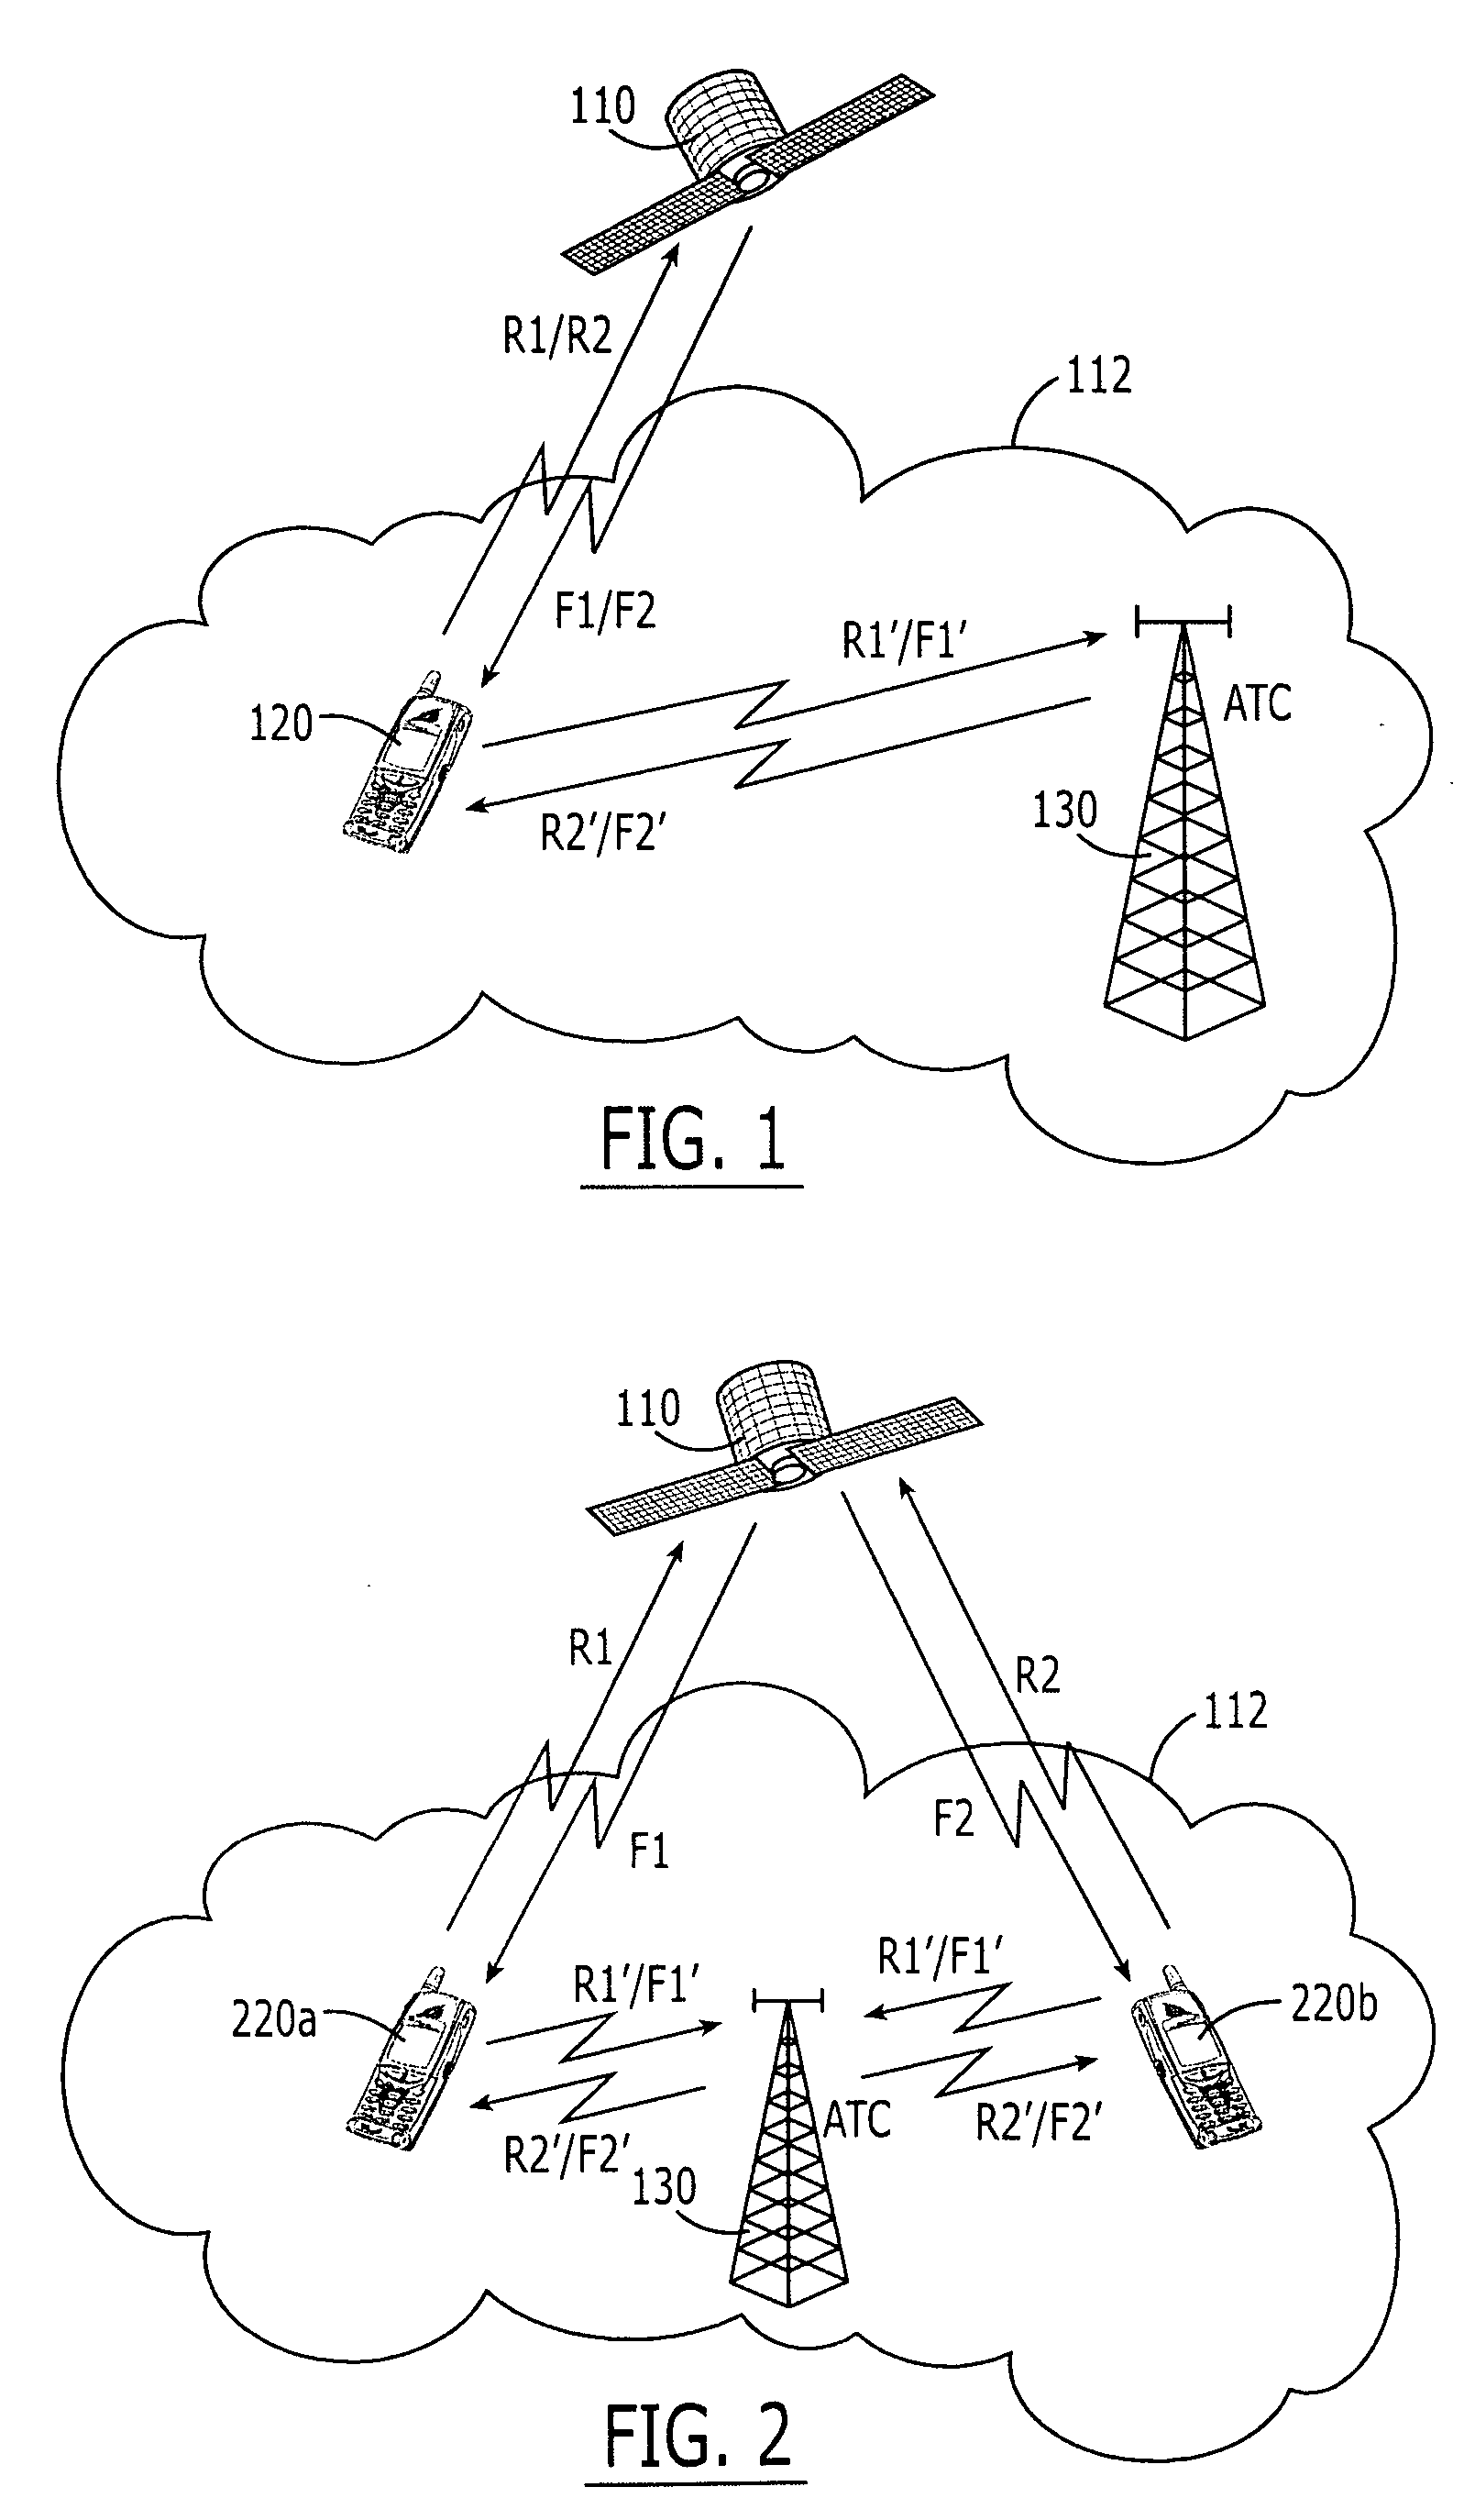 Systems and methods with different utilization of satellite frequency bands by a space-based network and an ancillary terrestrial network